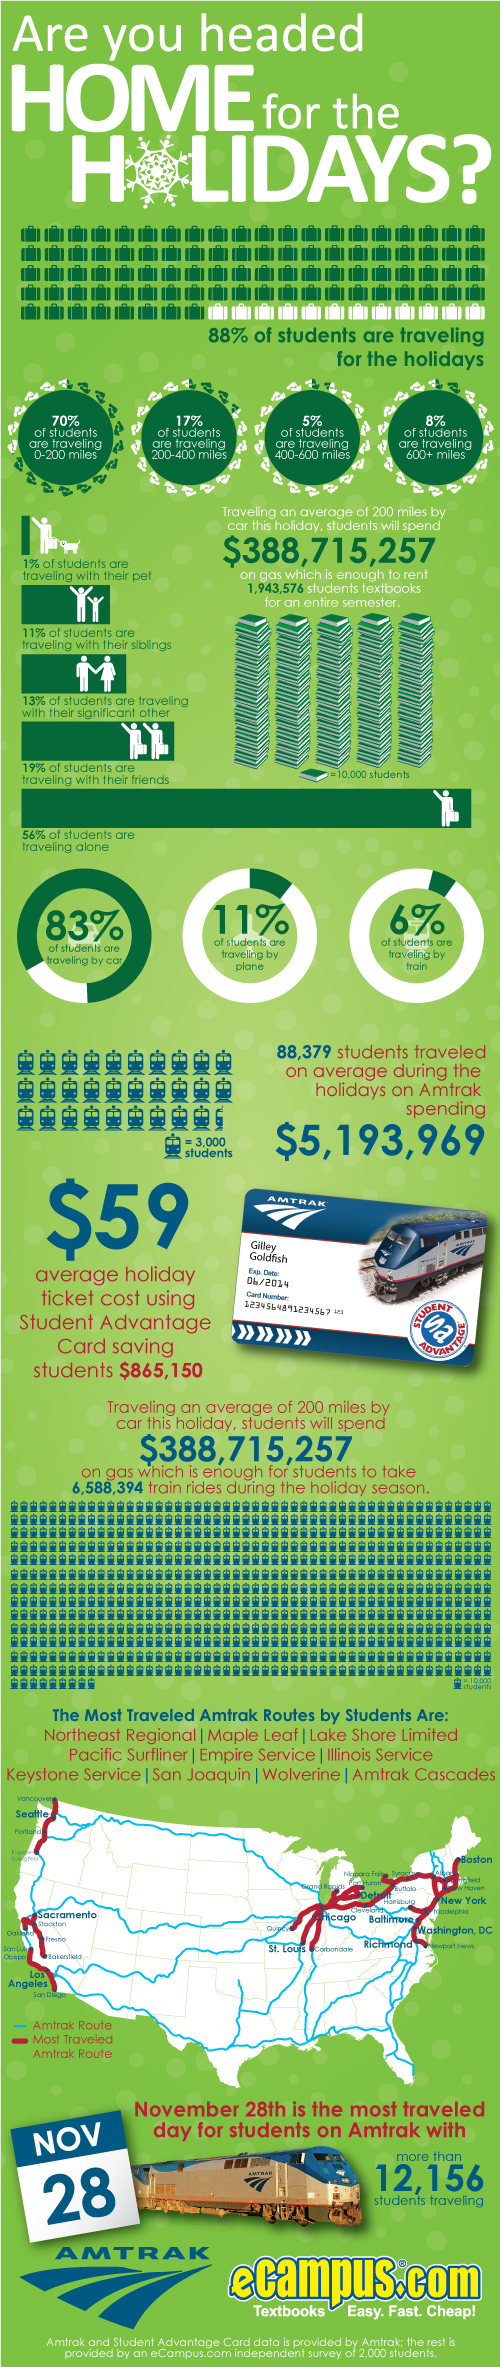 home for the holidays infographic